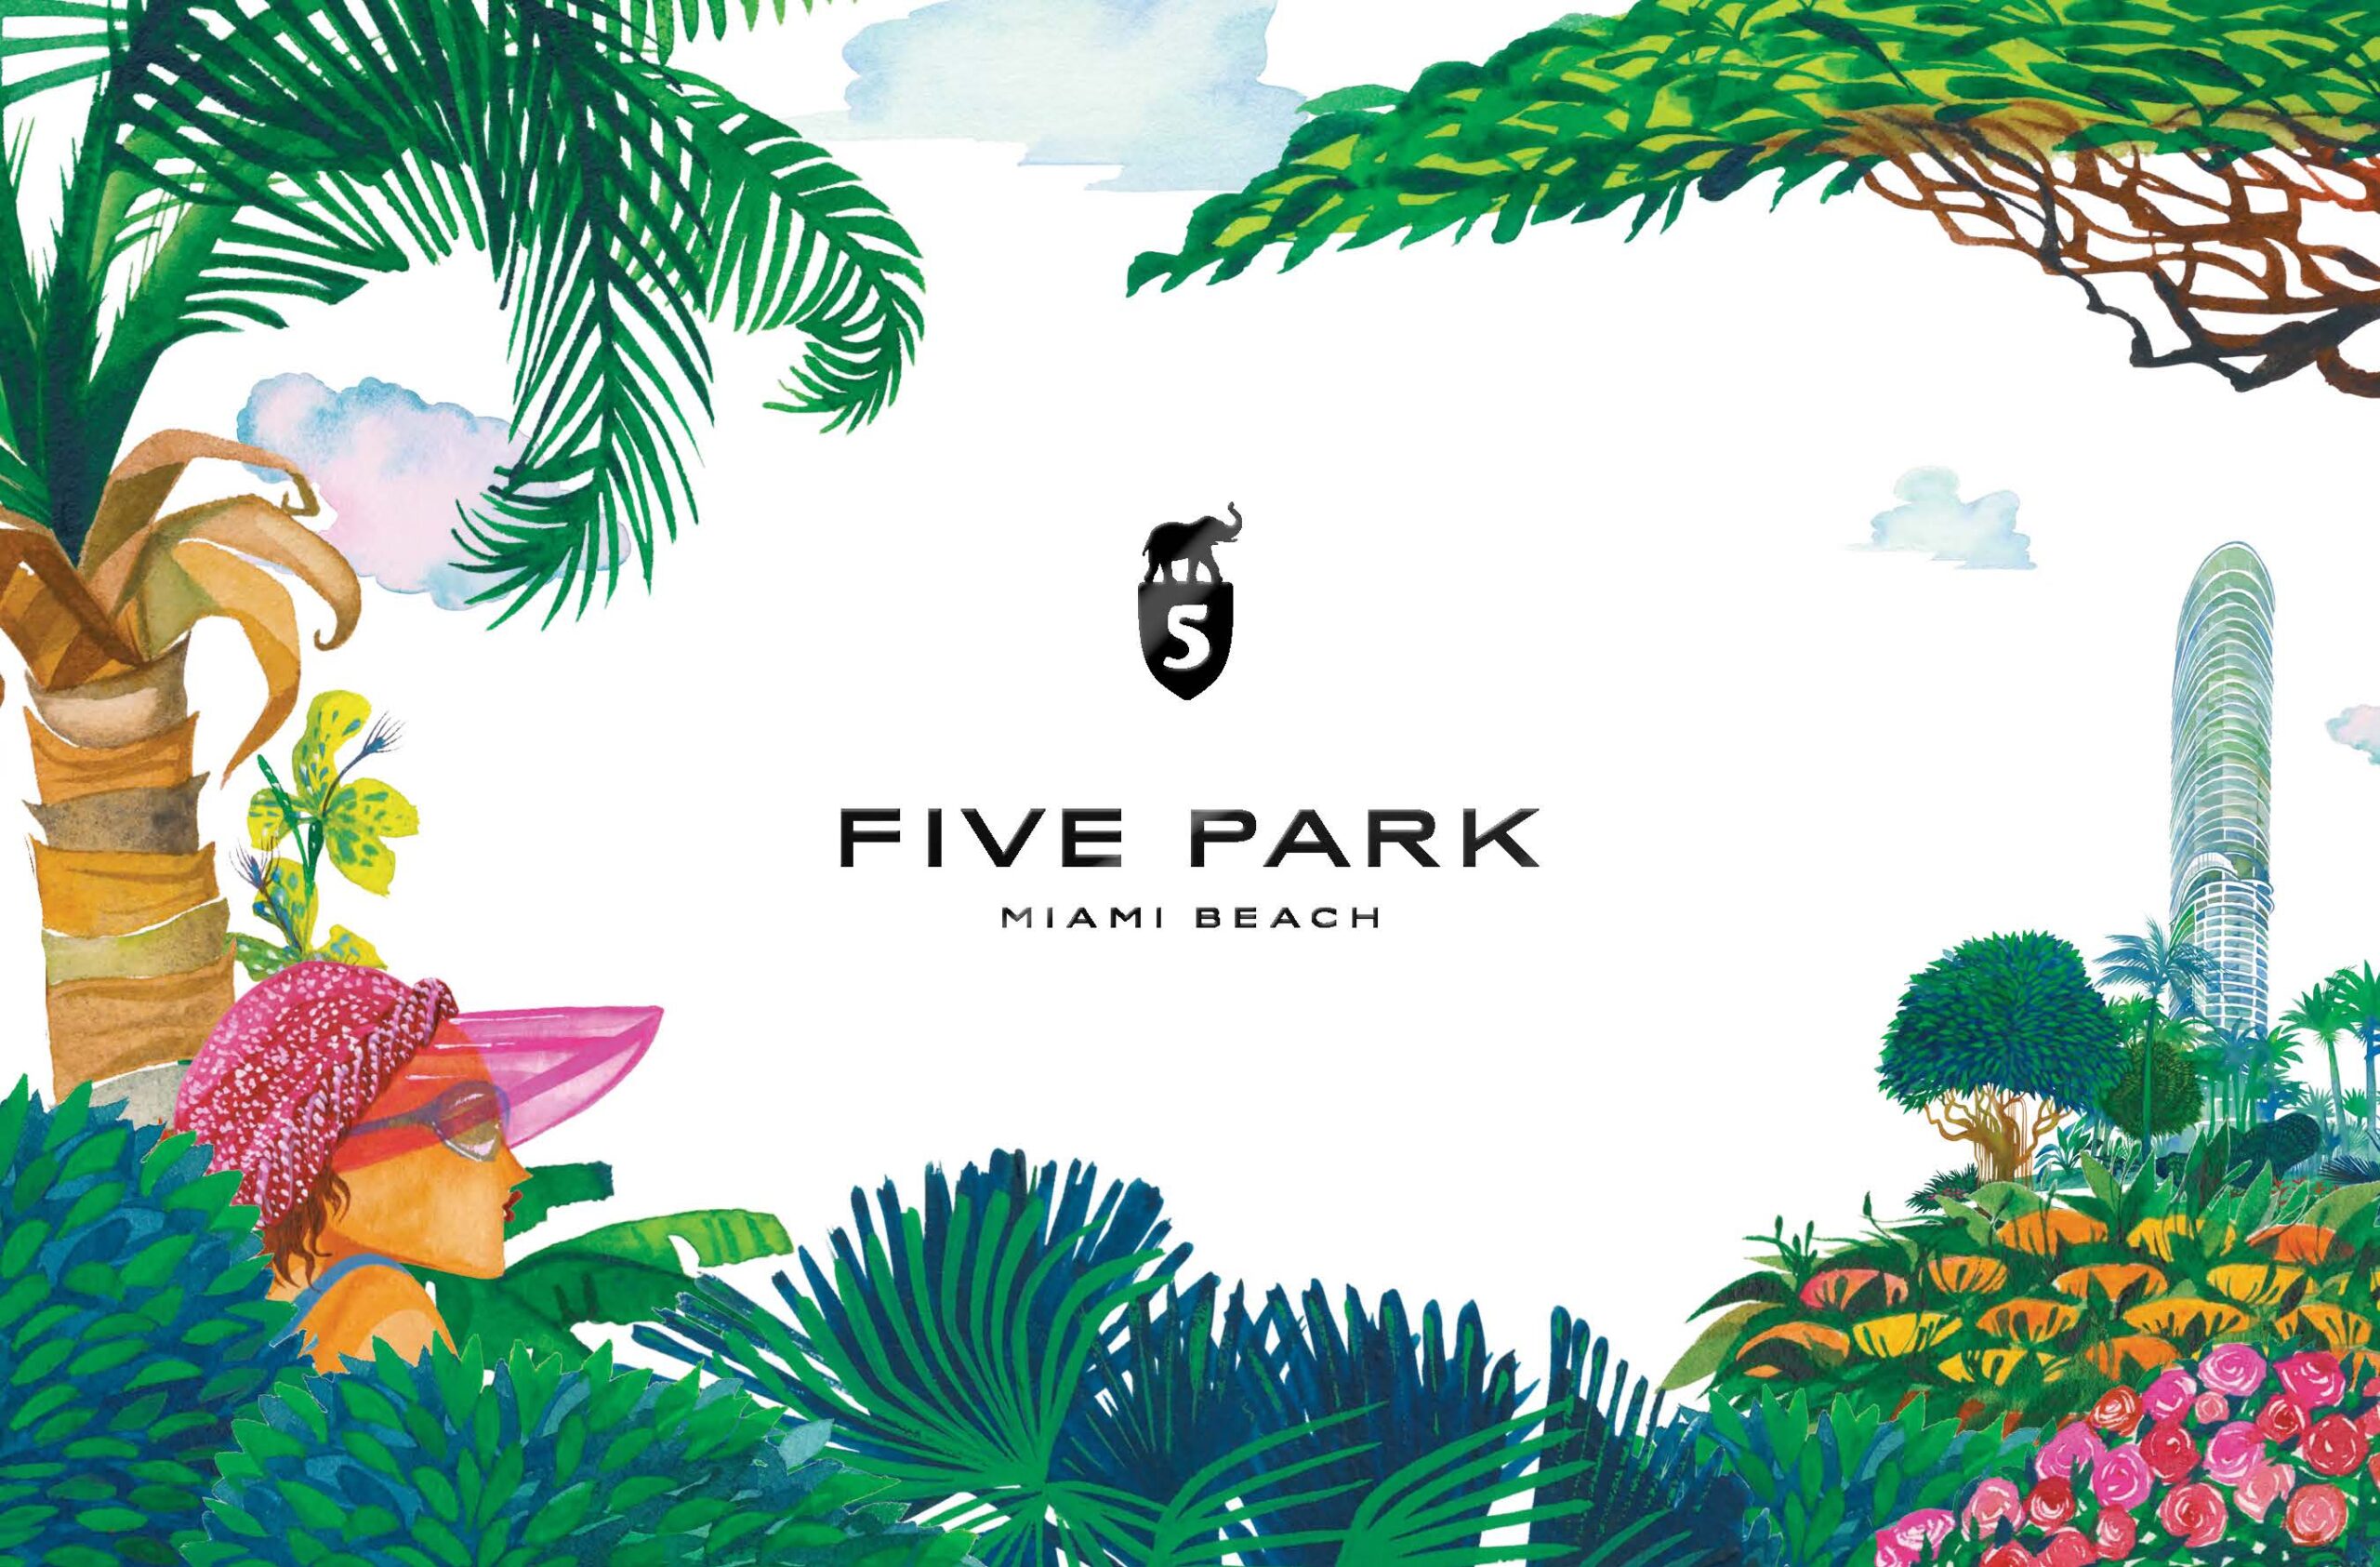 Featured image for “Five Park Miami Beach”